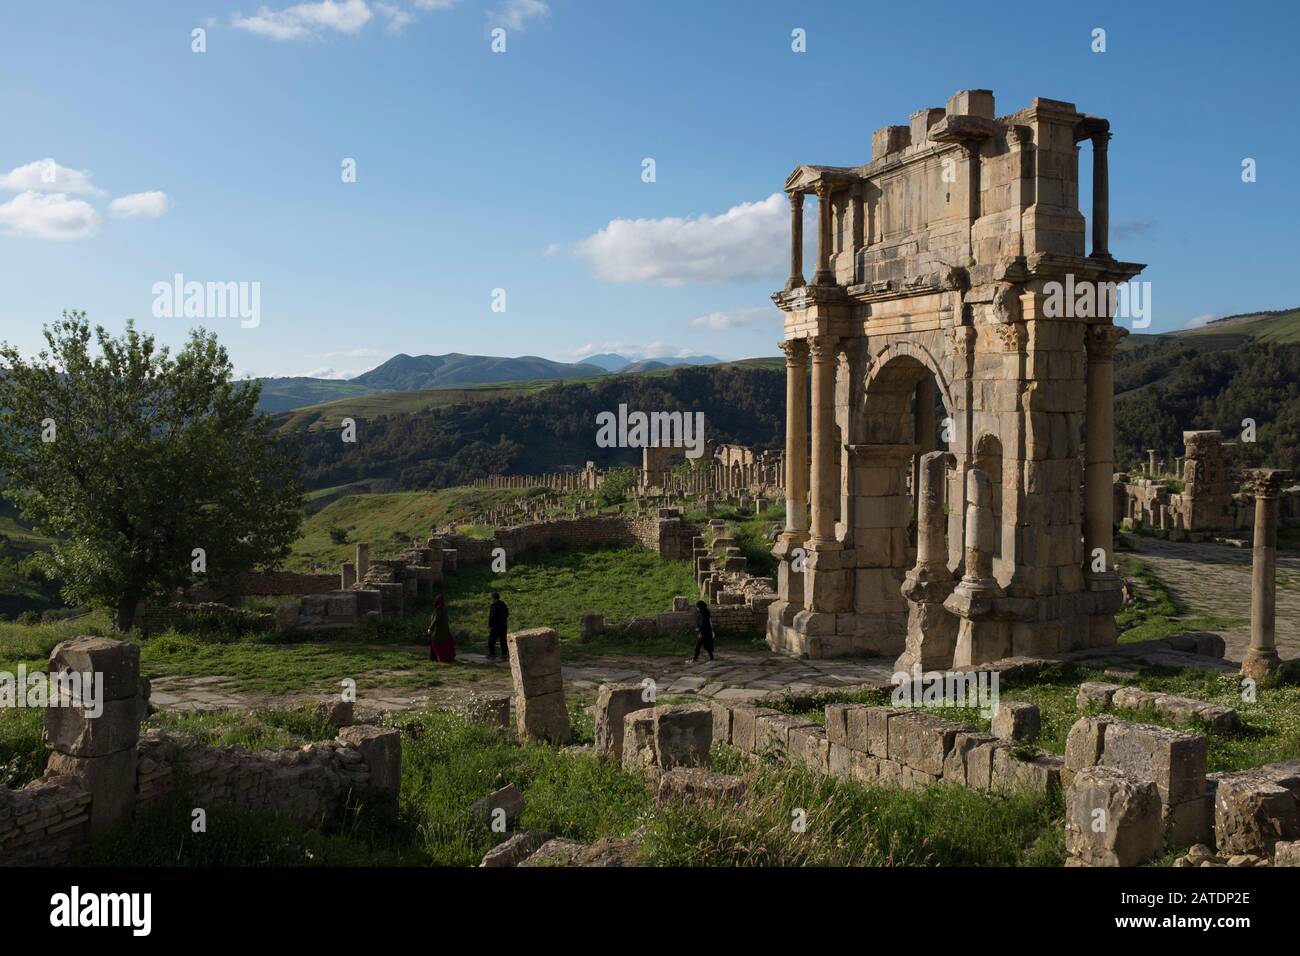 Djemila is the site of the ancient roman village of Cuicul, a UNESCO World Heritage site situated close to Setif in Northern Algeria. Stock Photo